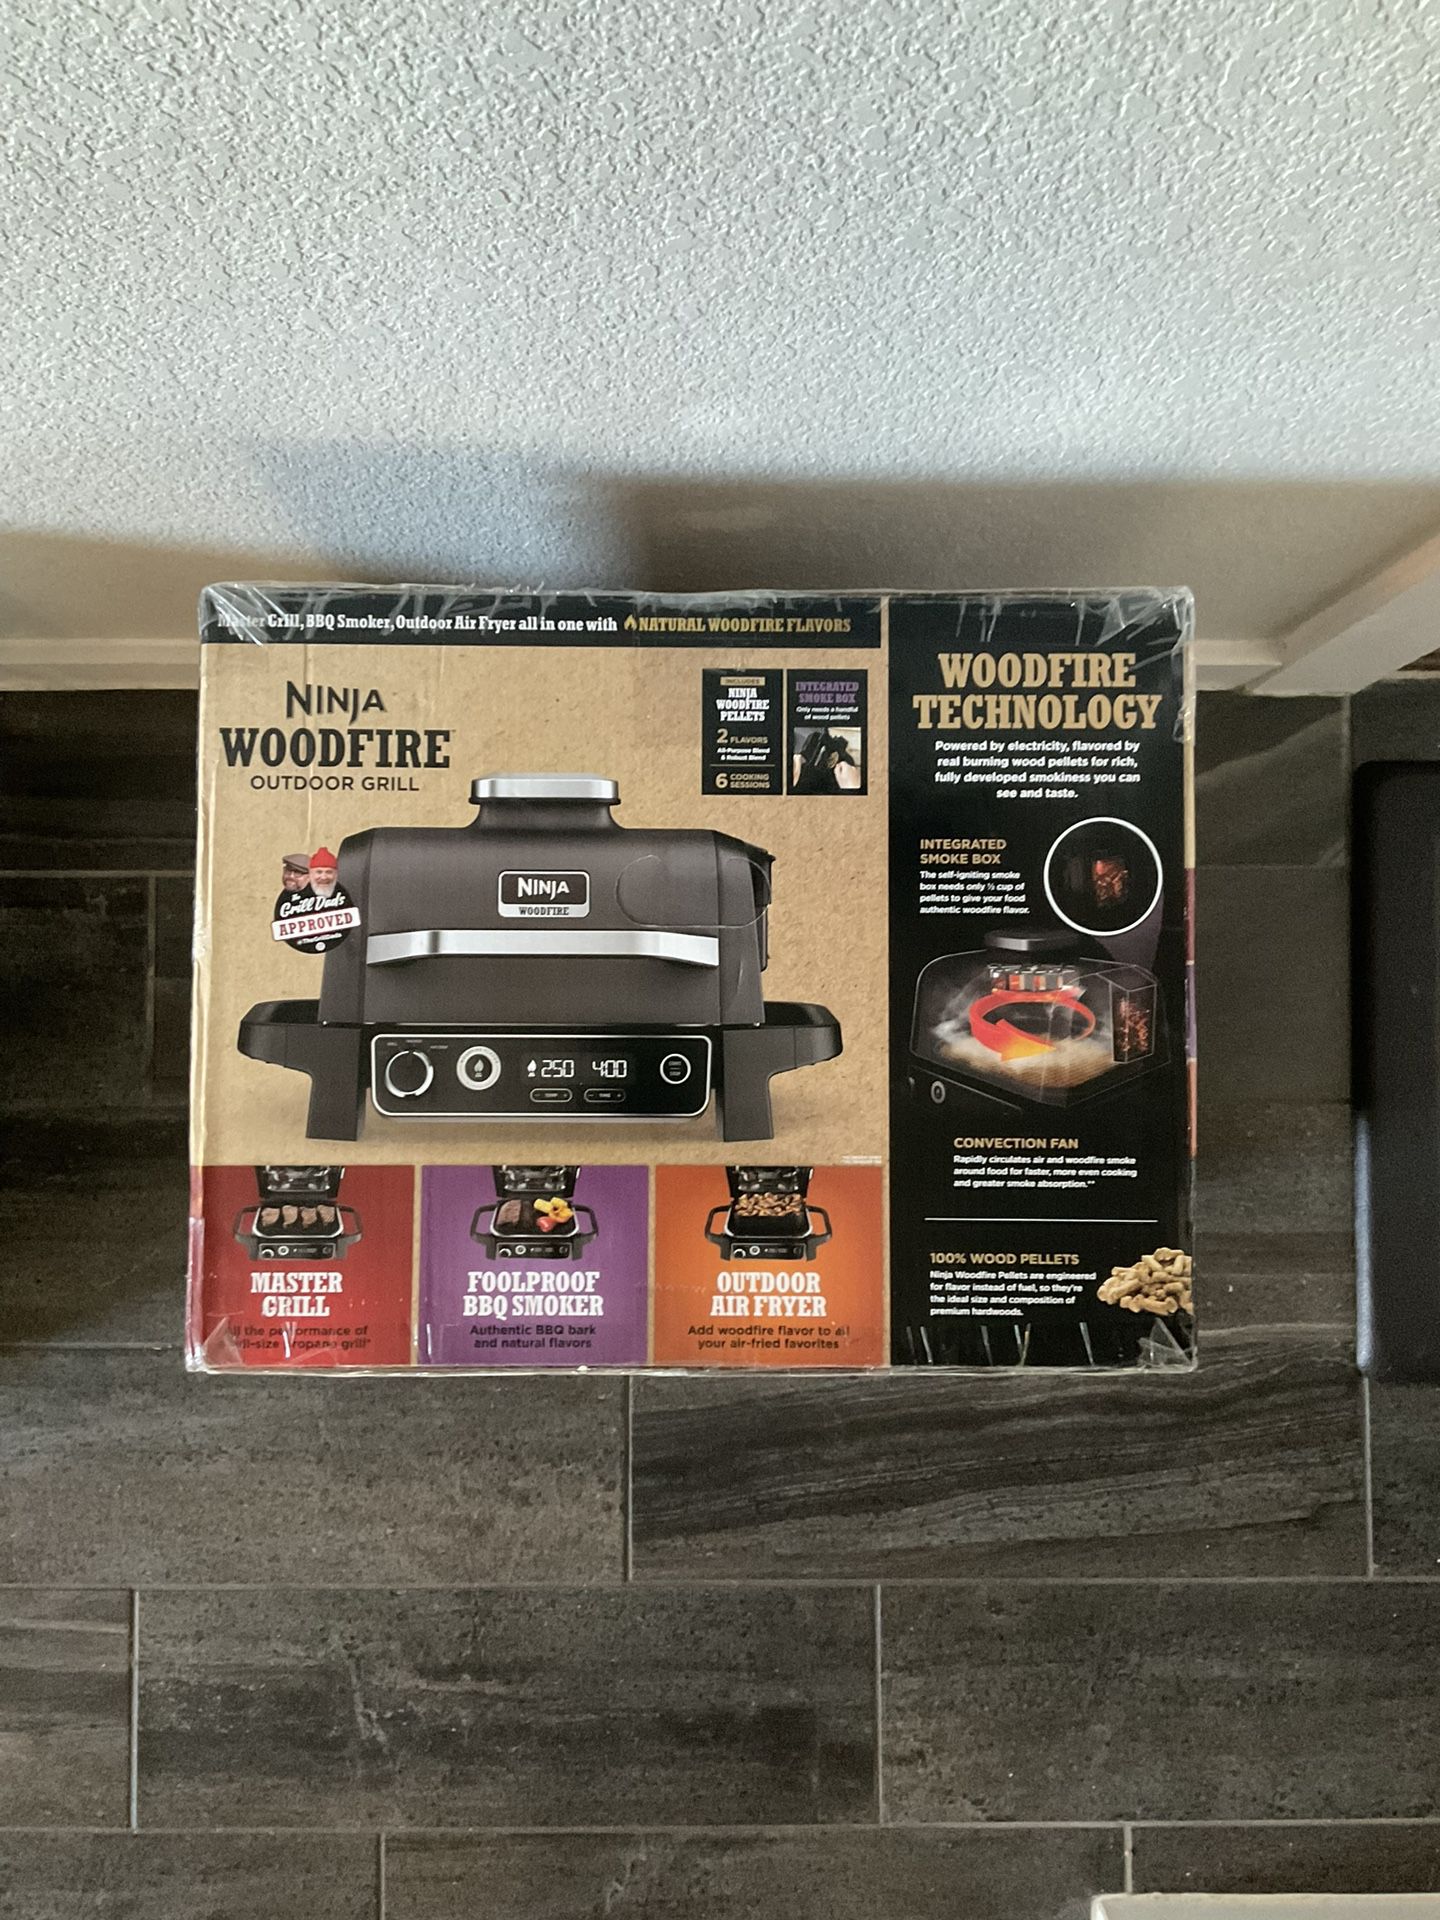 Ninja Wood fire Outdoor Grill for Sale in Kissimmee, FL - OfferUp